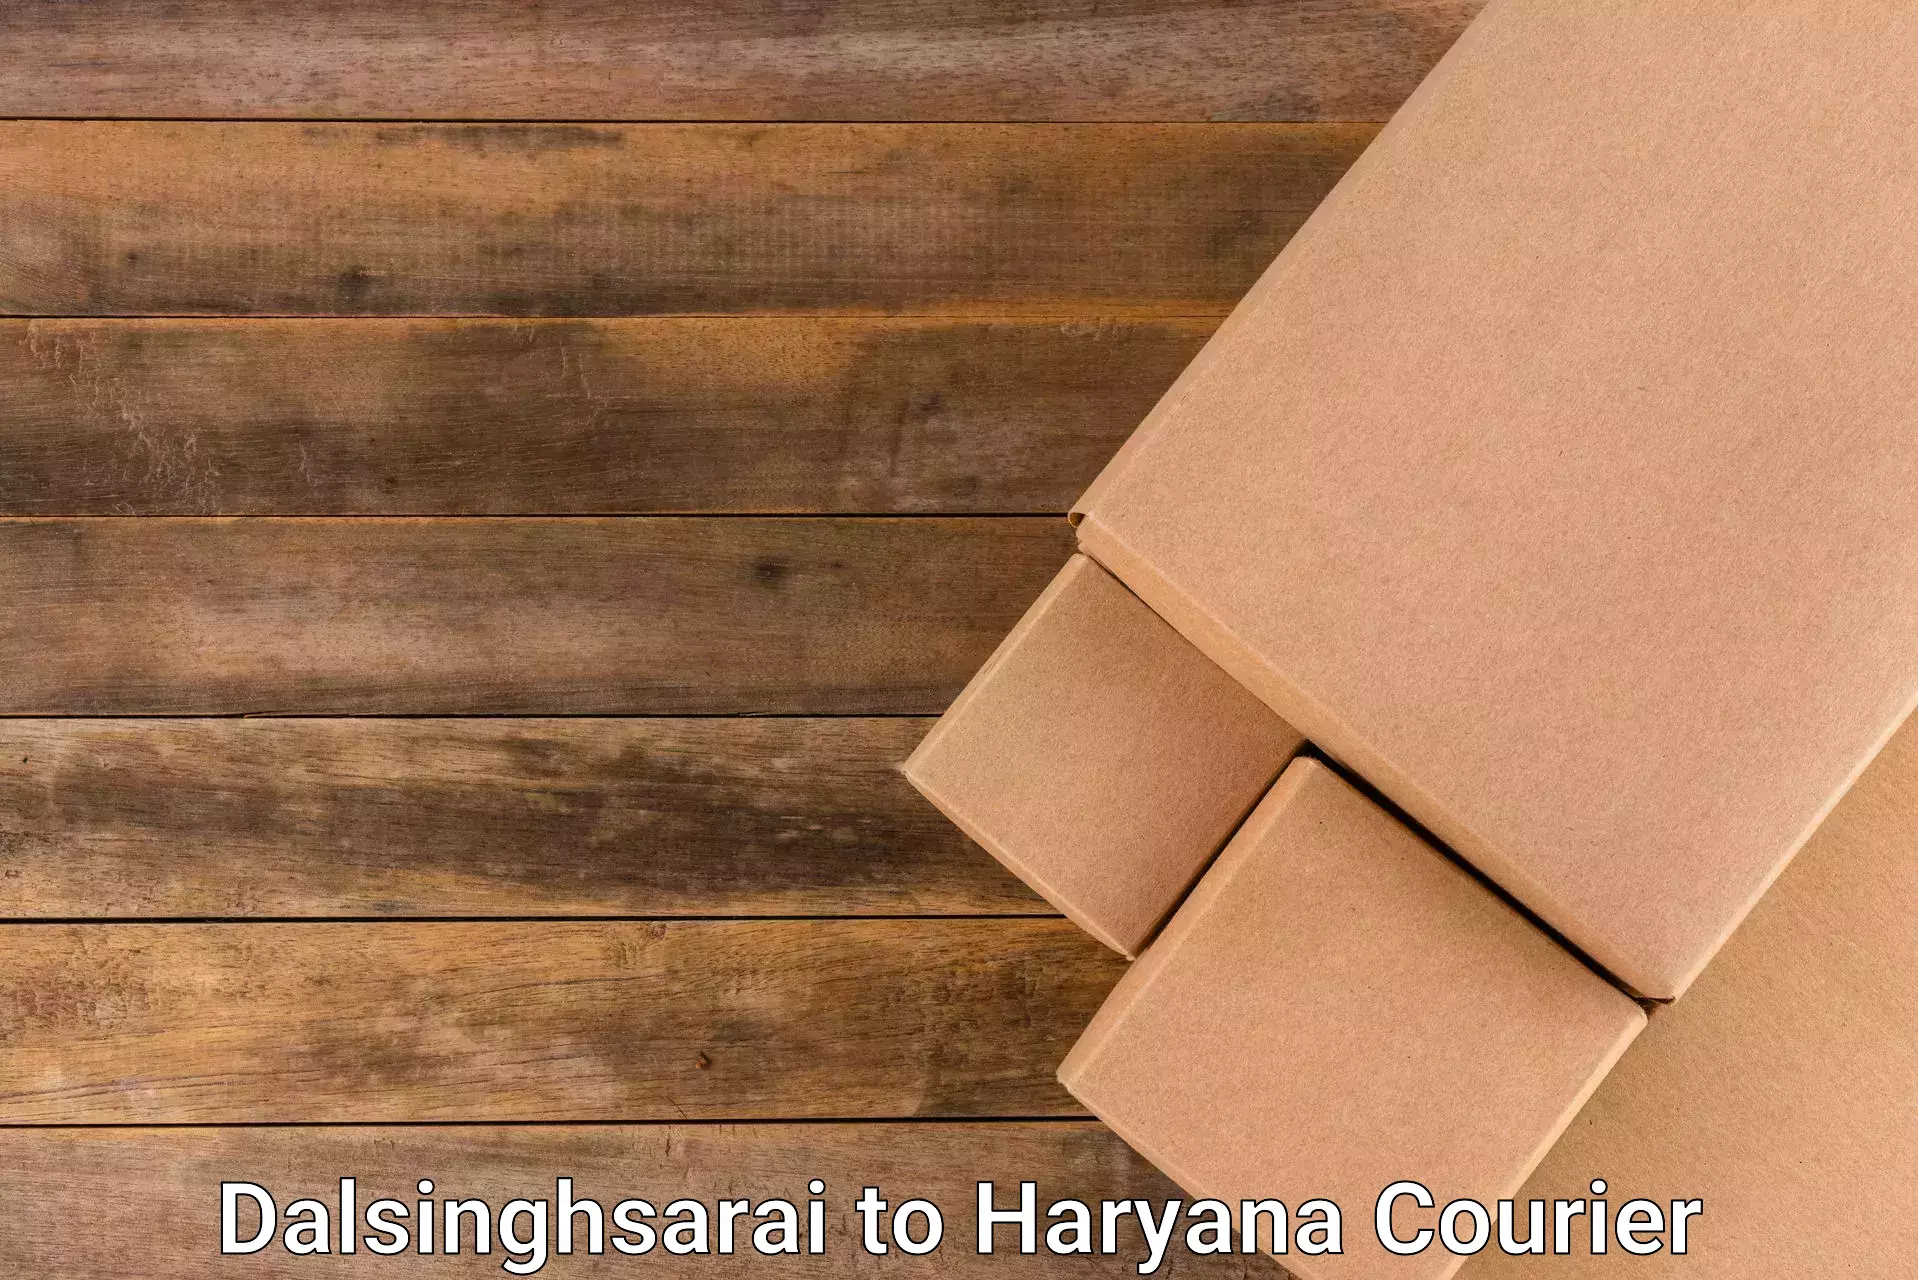 Dynamic courier operations Dalsinghsarai to Gurgaon